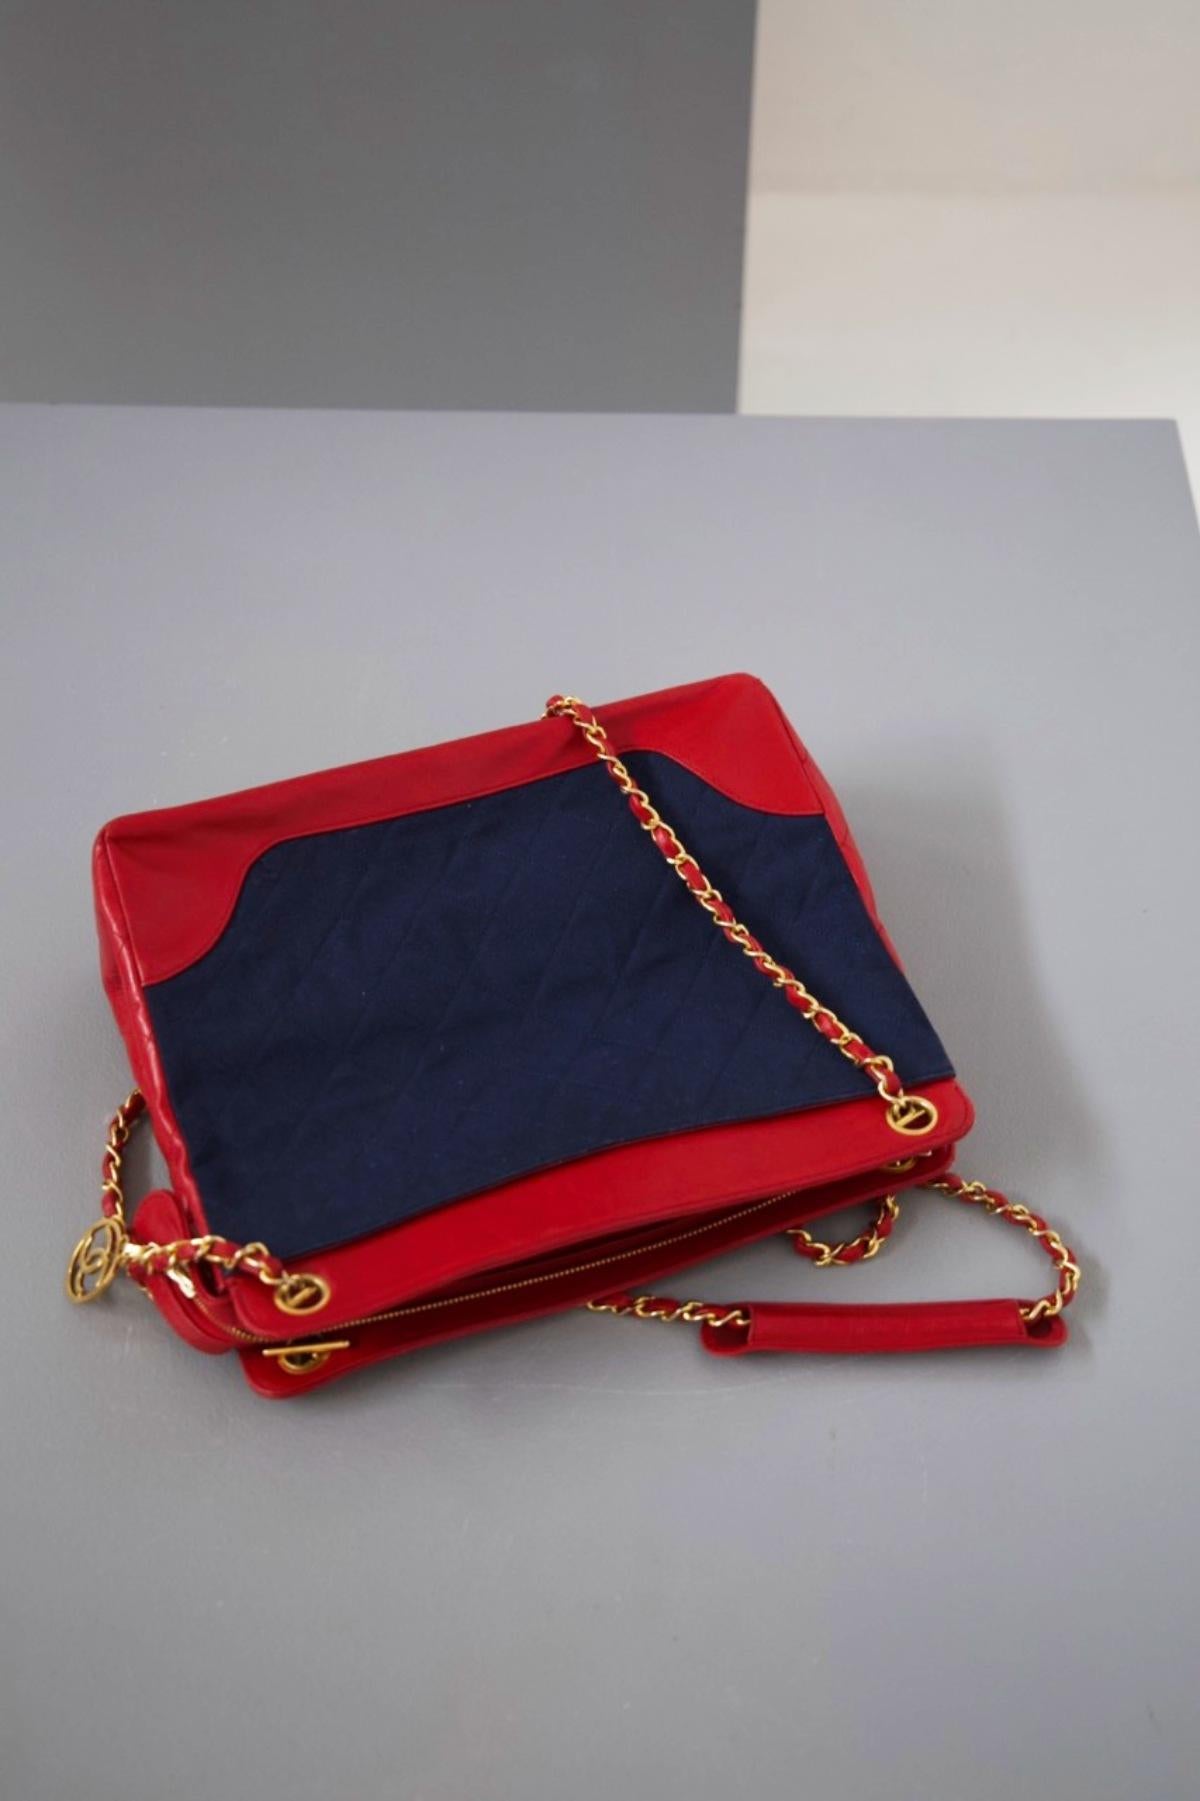 Rare Chanel Shoulder Bag in Red Leather and Denim Fabric For Sale 1